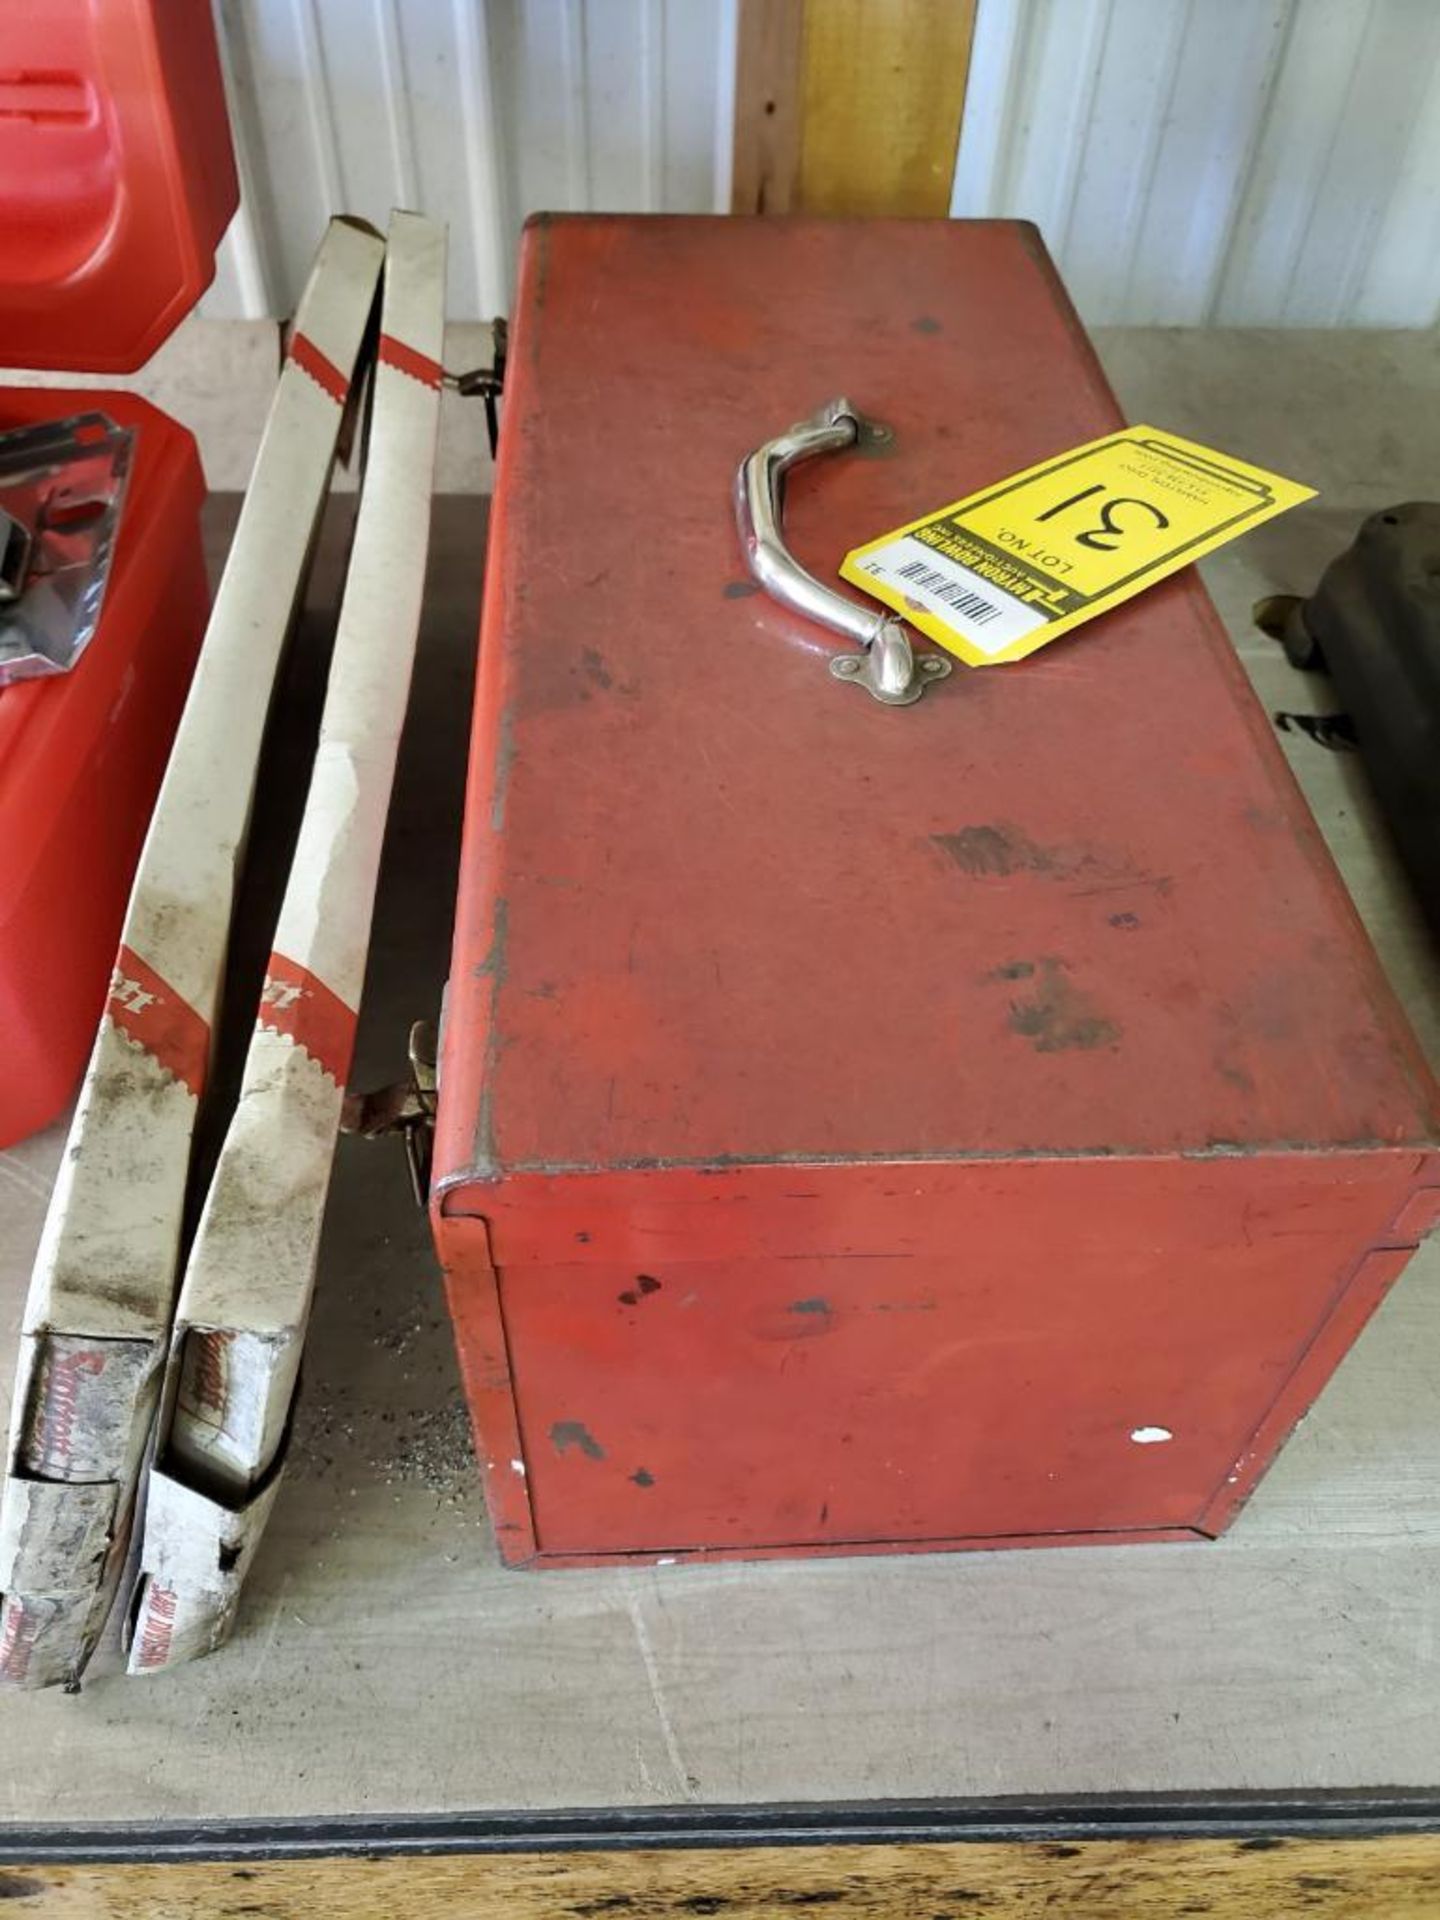 MILWAUKEE HEAVY DUTY PORTABLE BAND SAW WITH SPARE BLADE BANDS - Image 2 of 6